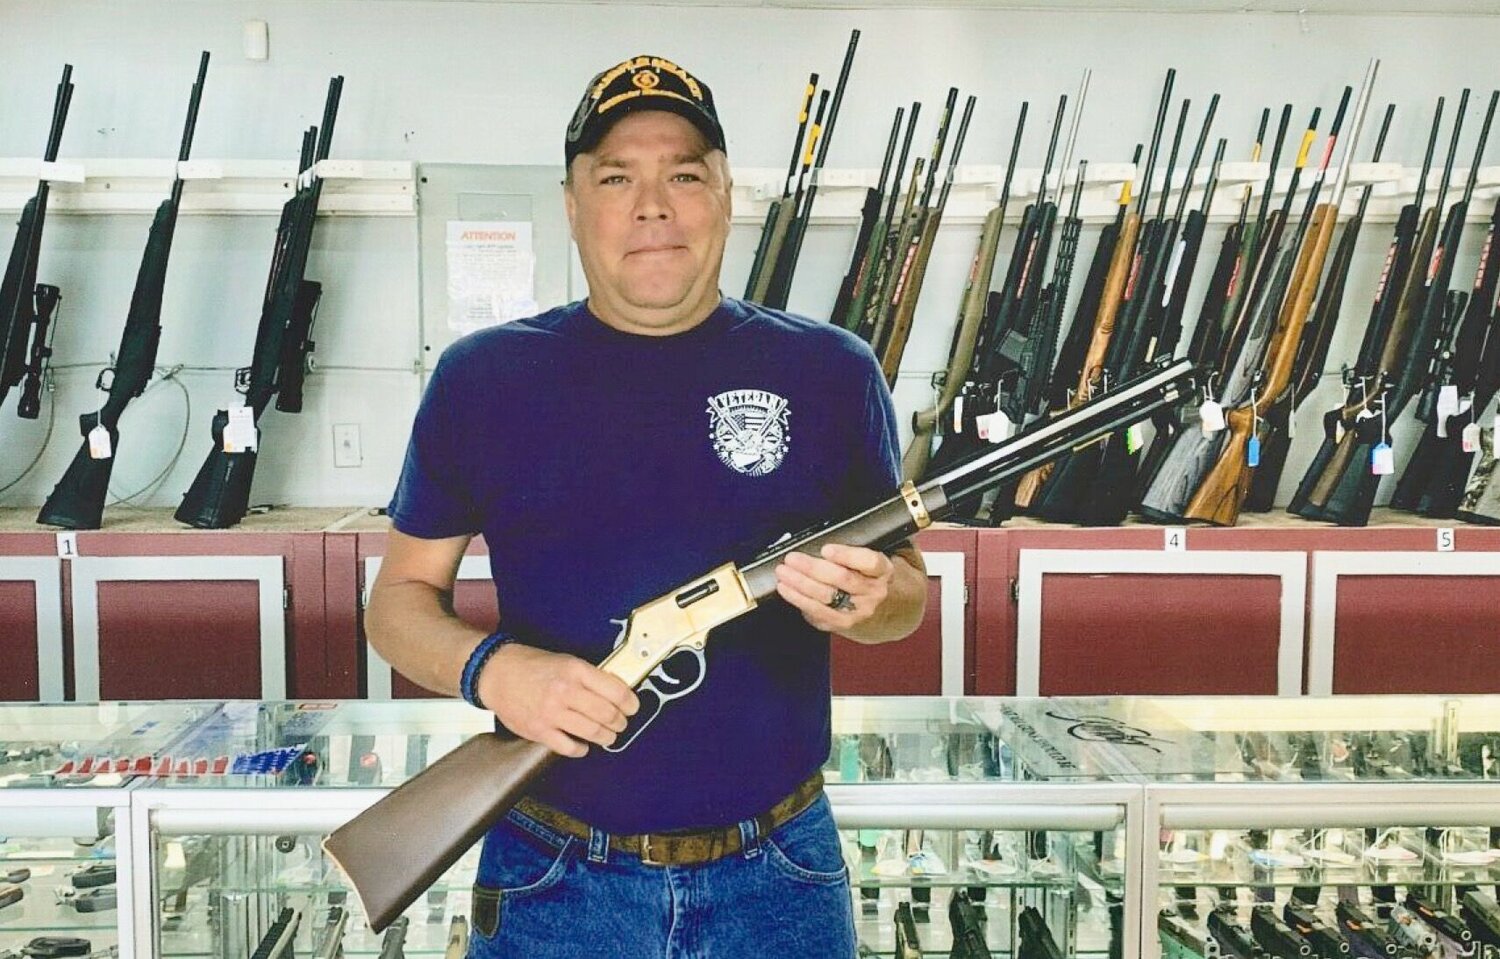 Jarred Rhine was the winner of a Henry .44 Magnum rifle given away through a drawing held by the Bakersfield American Legion, Post 0374. Tickets for the giveaway drawing were sold as a fundraiser for the post at the Sept. 9 car show held in Bakersfield.